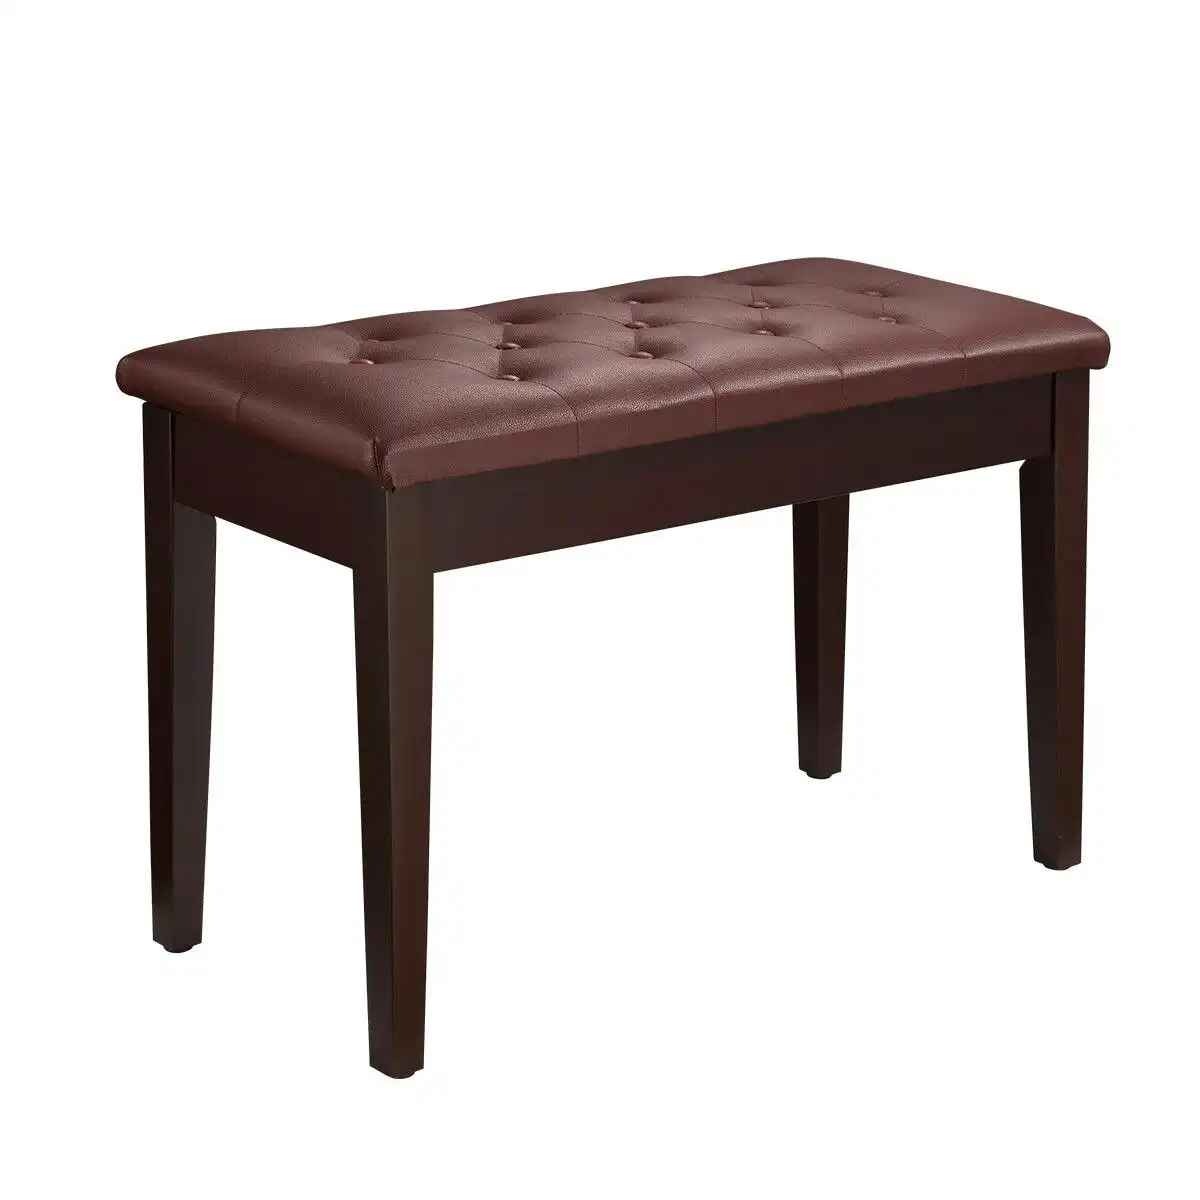 Melodic  Luxury Piano Keyboard Stool Bench Chair with Faux Leather Seat and Storage Compartment Walnut